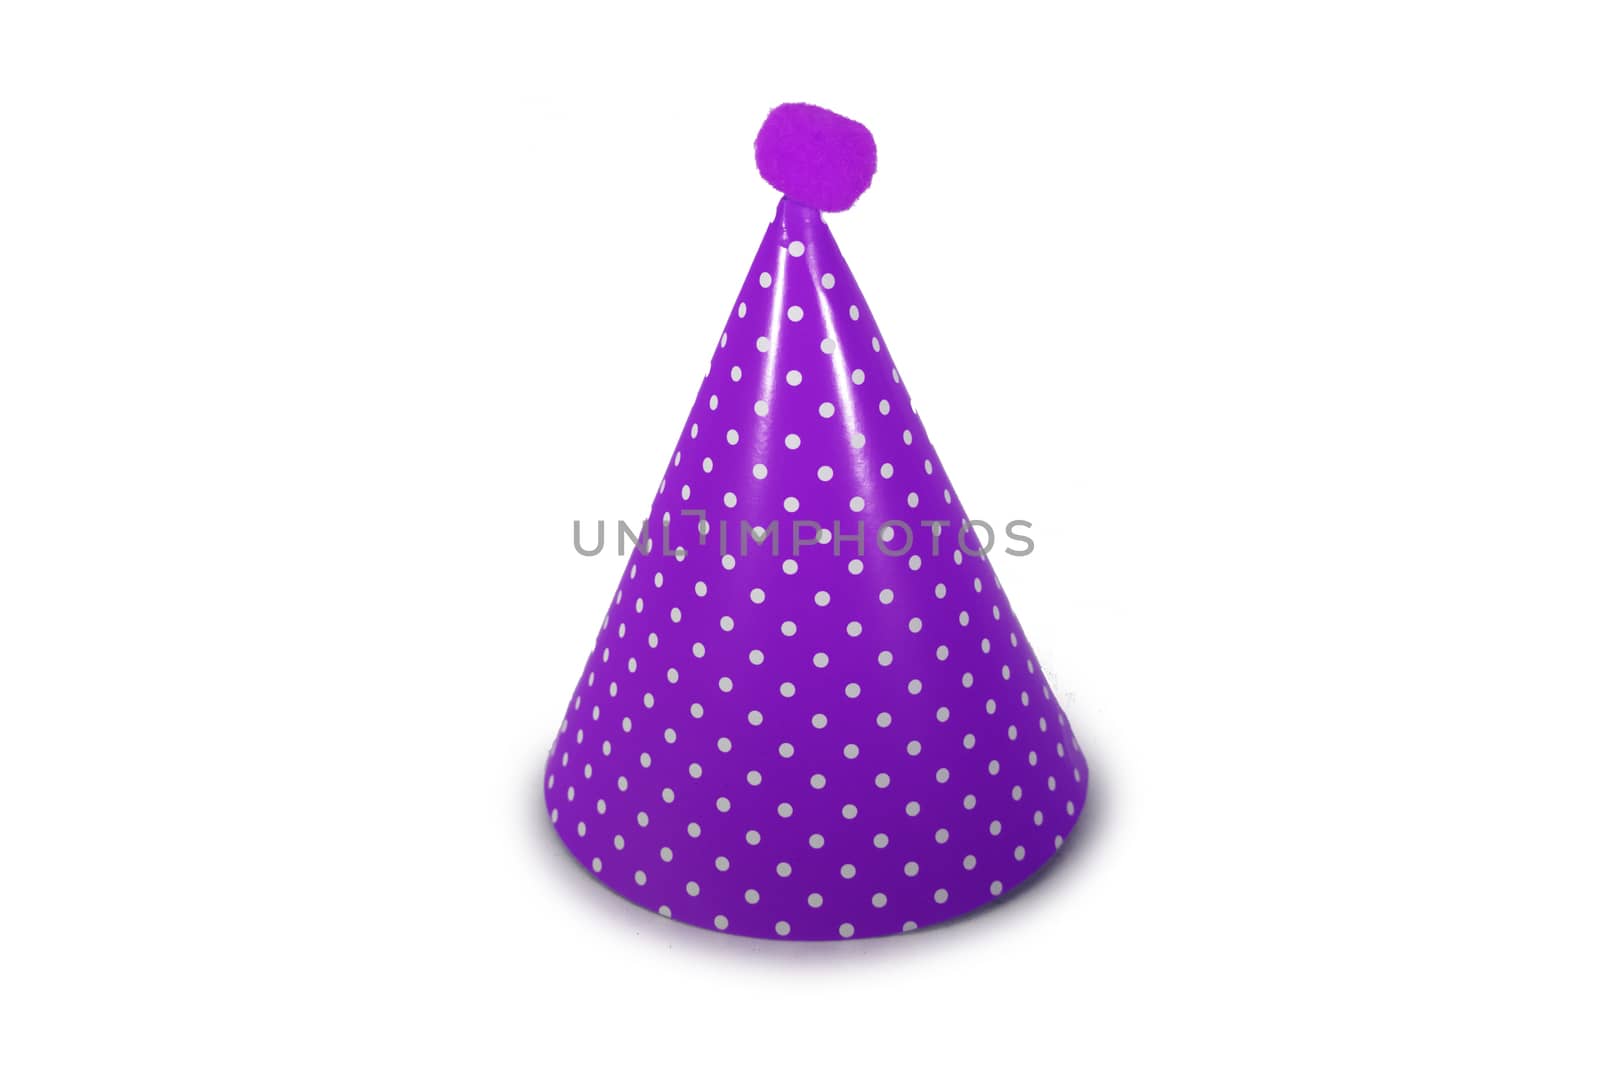 A Purple Birthday Hat on a Pure White Background by bju12290